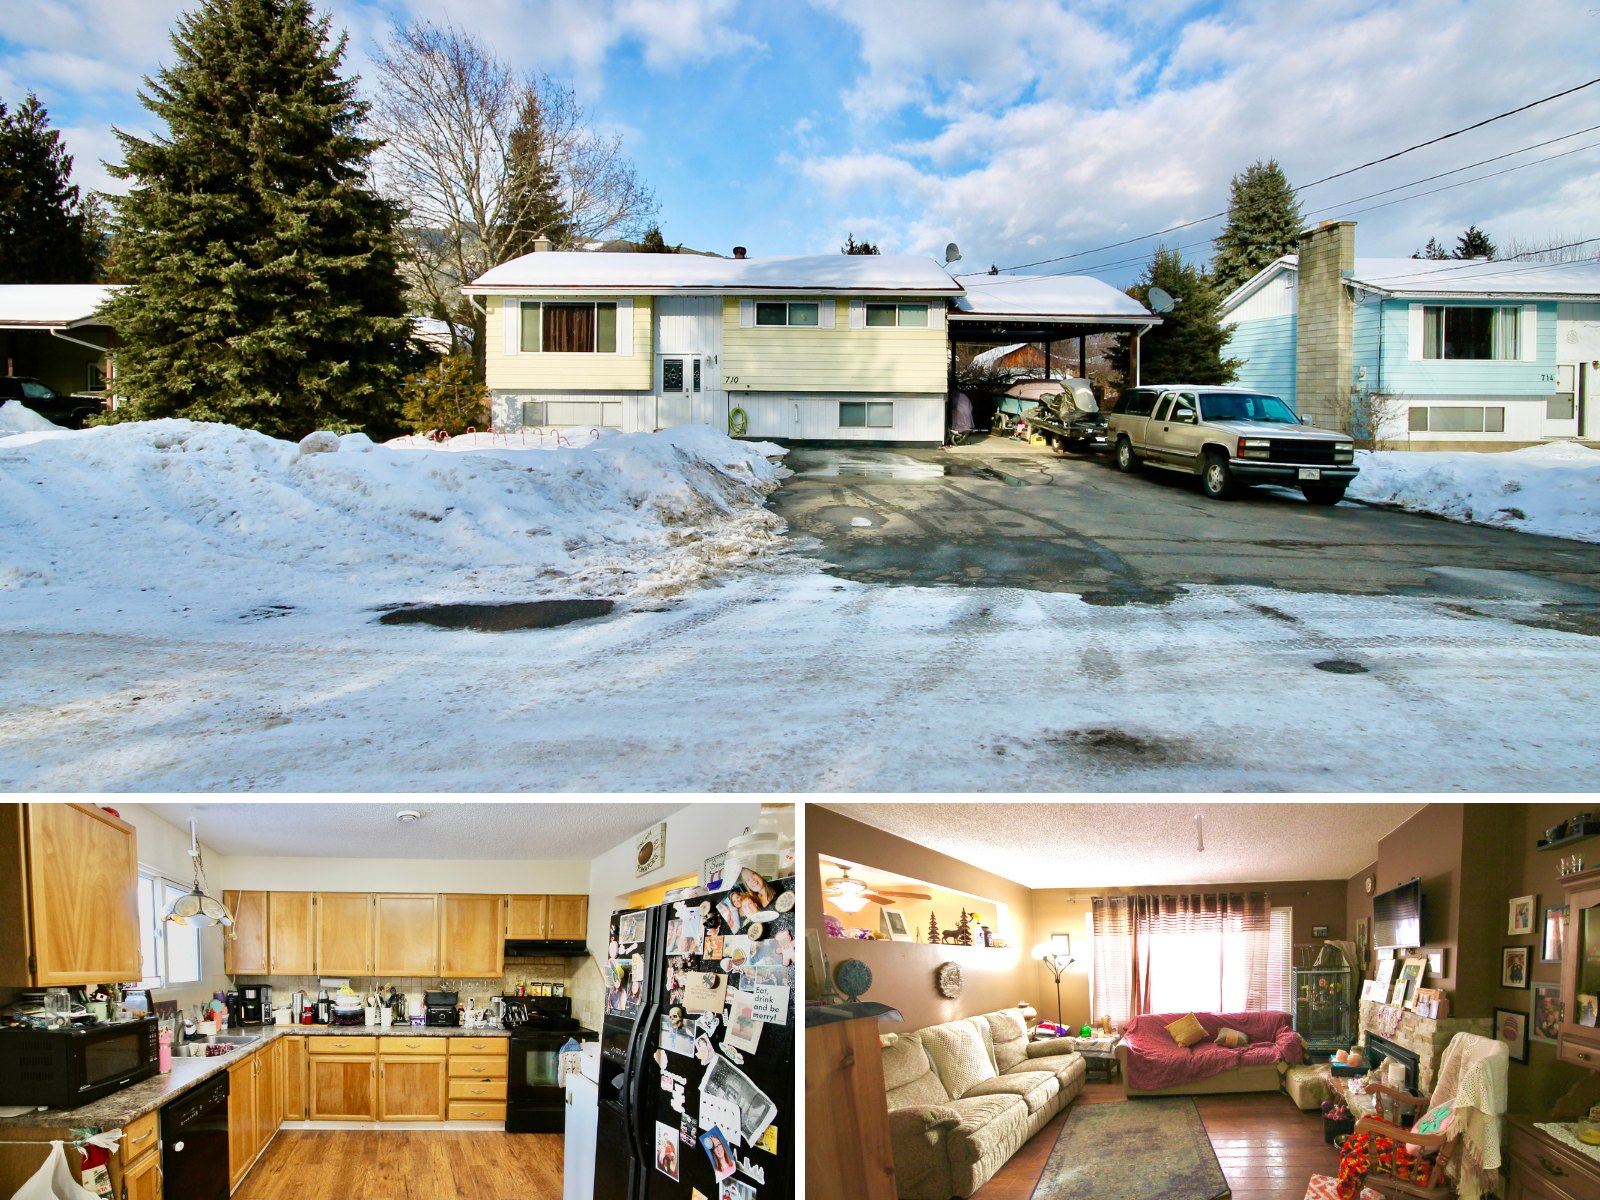 Main Photo: 710 Cedar St. in Sicamous: House for sale : MLS®# 10245429